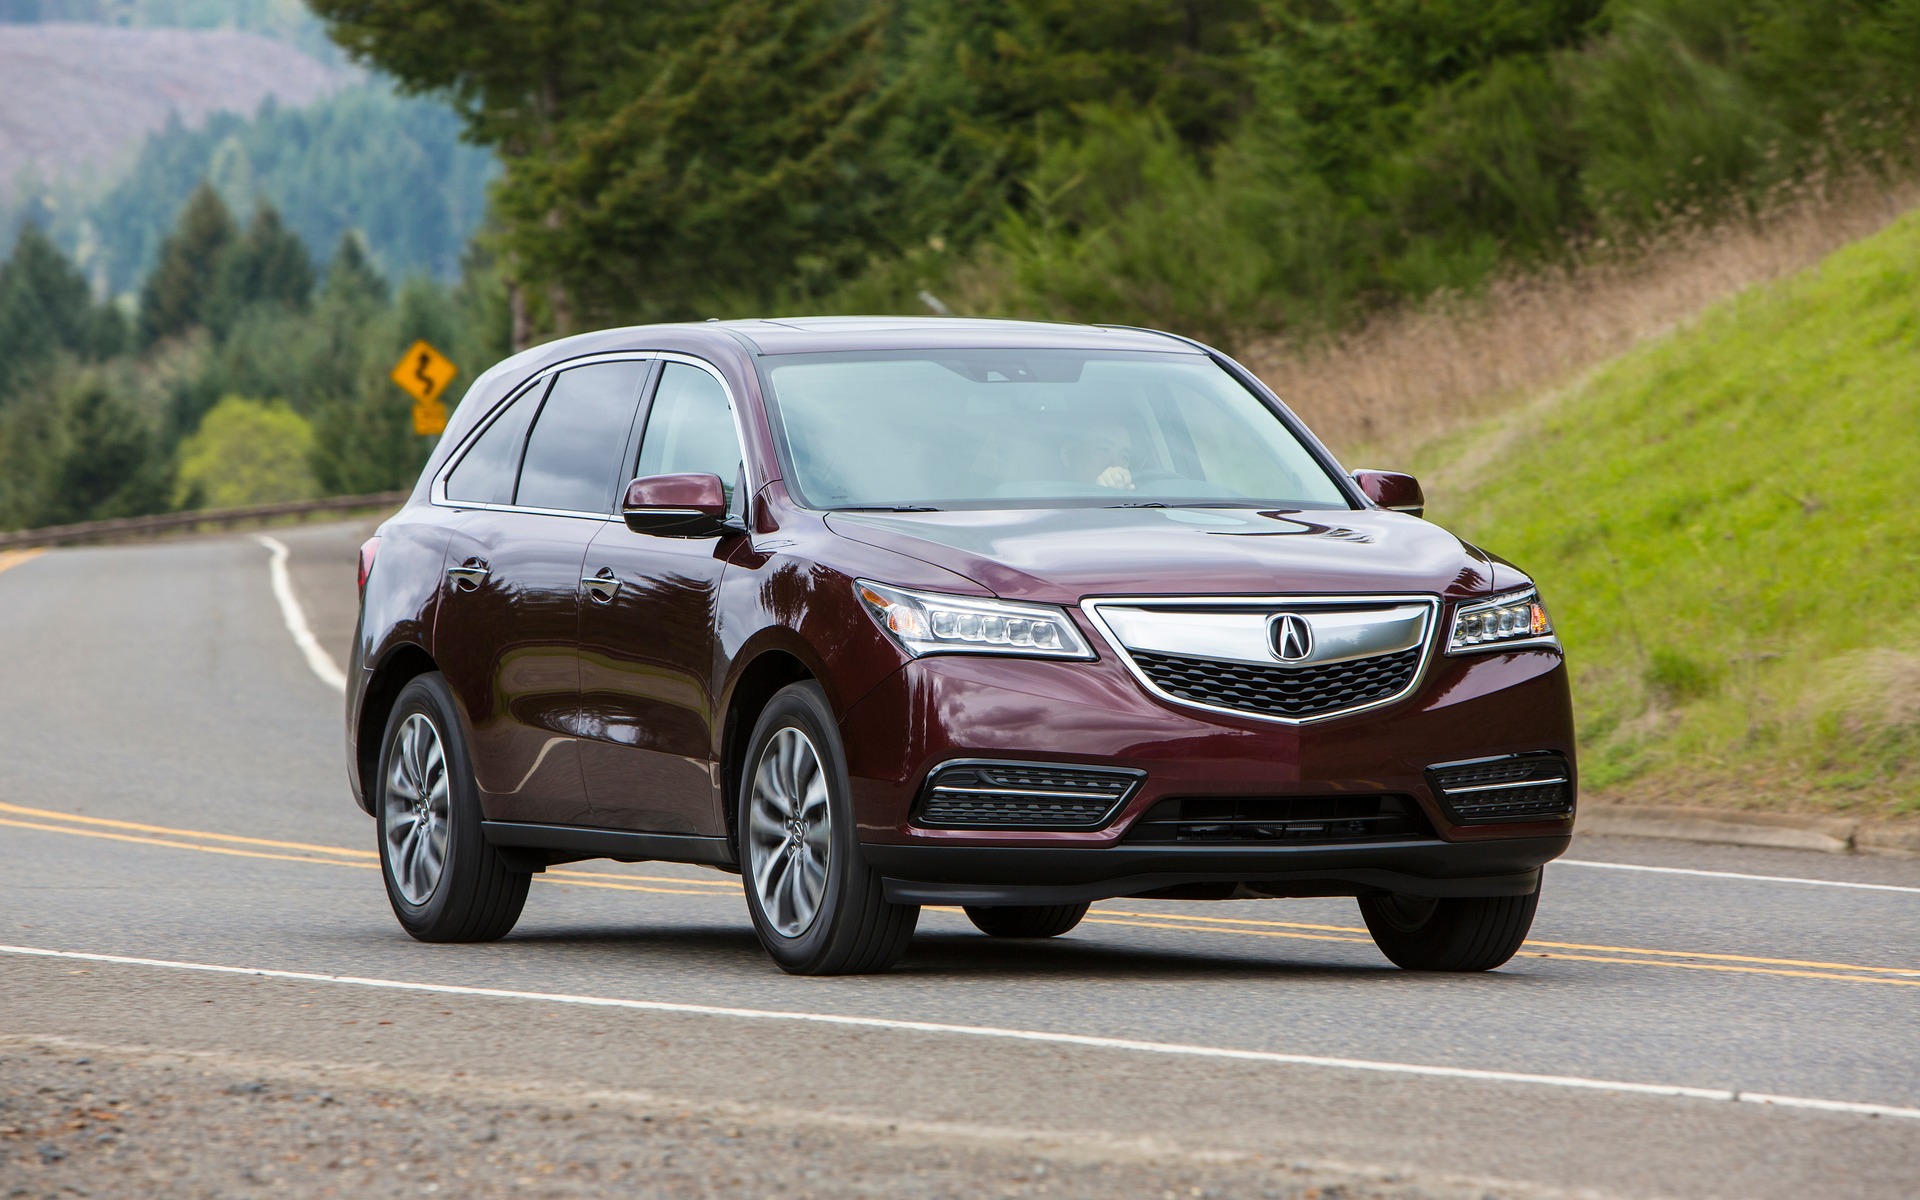 The MDX is Acura’s best-selling vehicle.